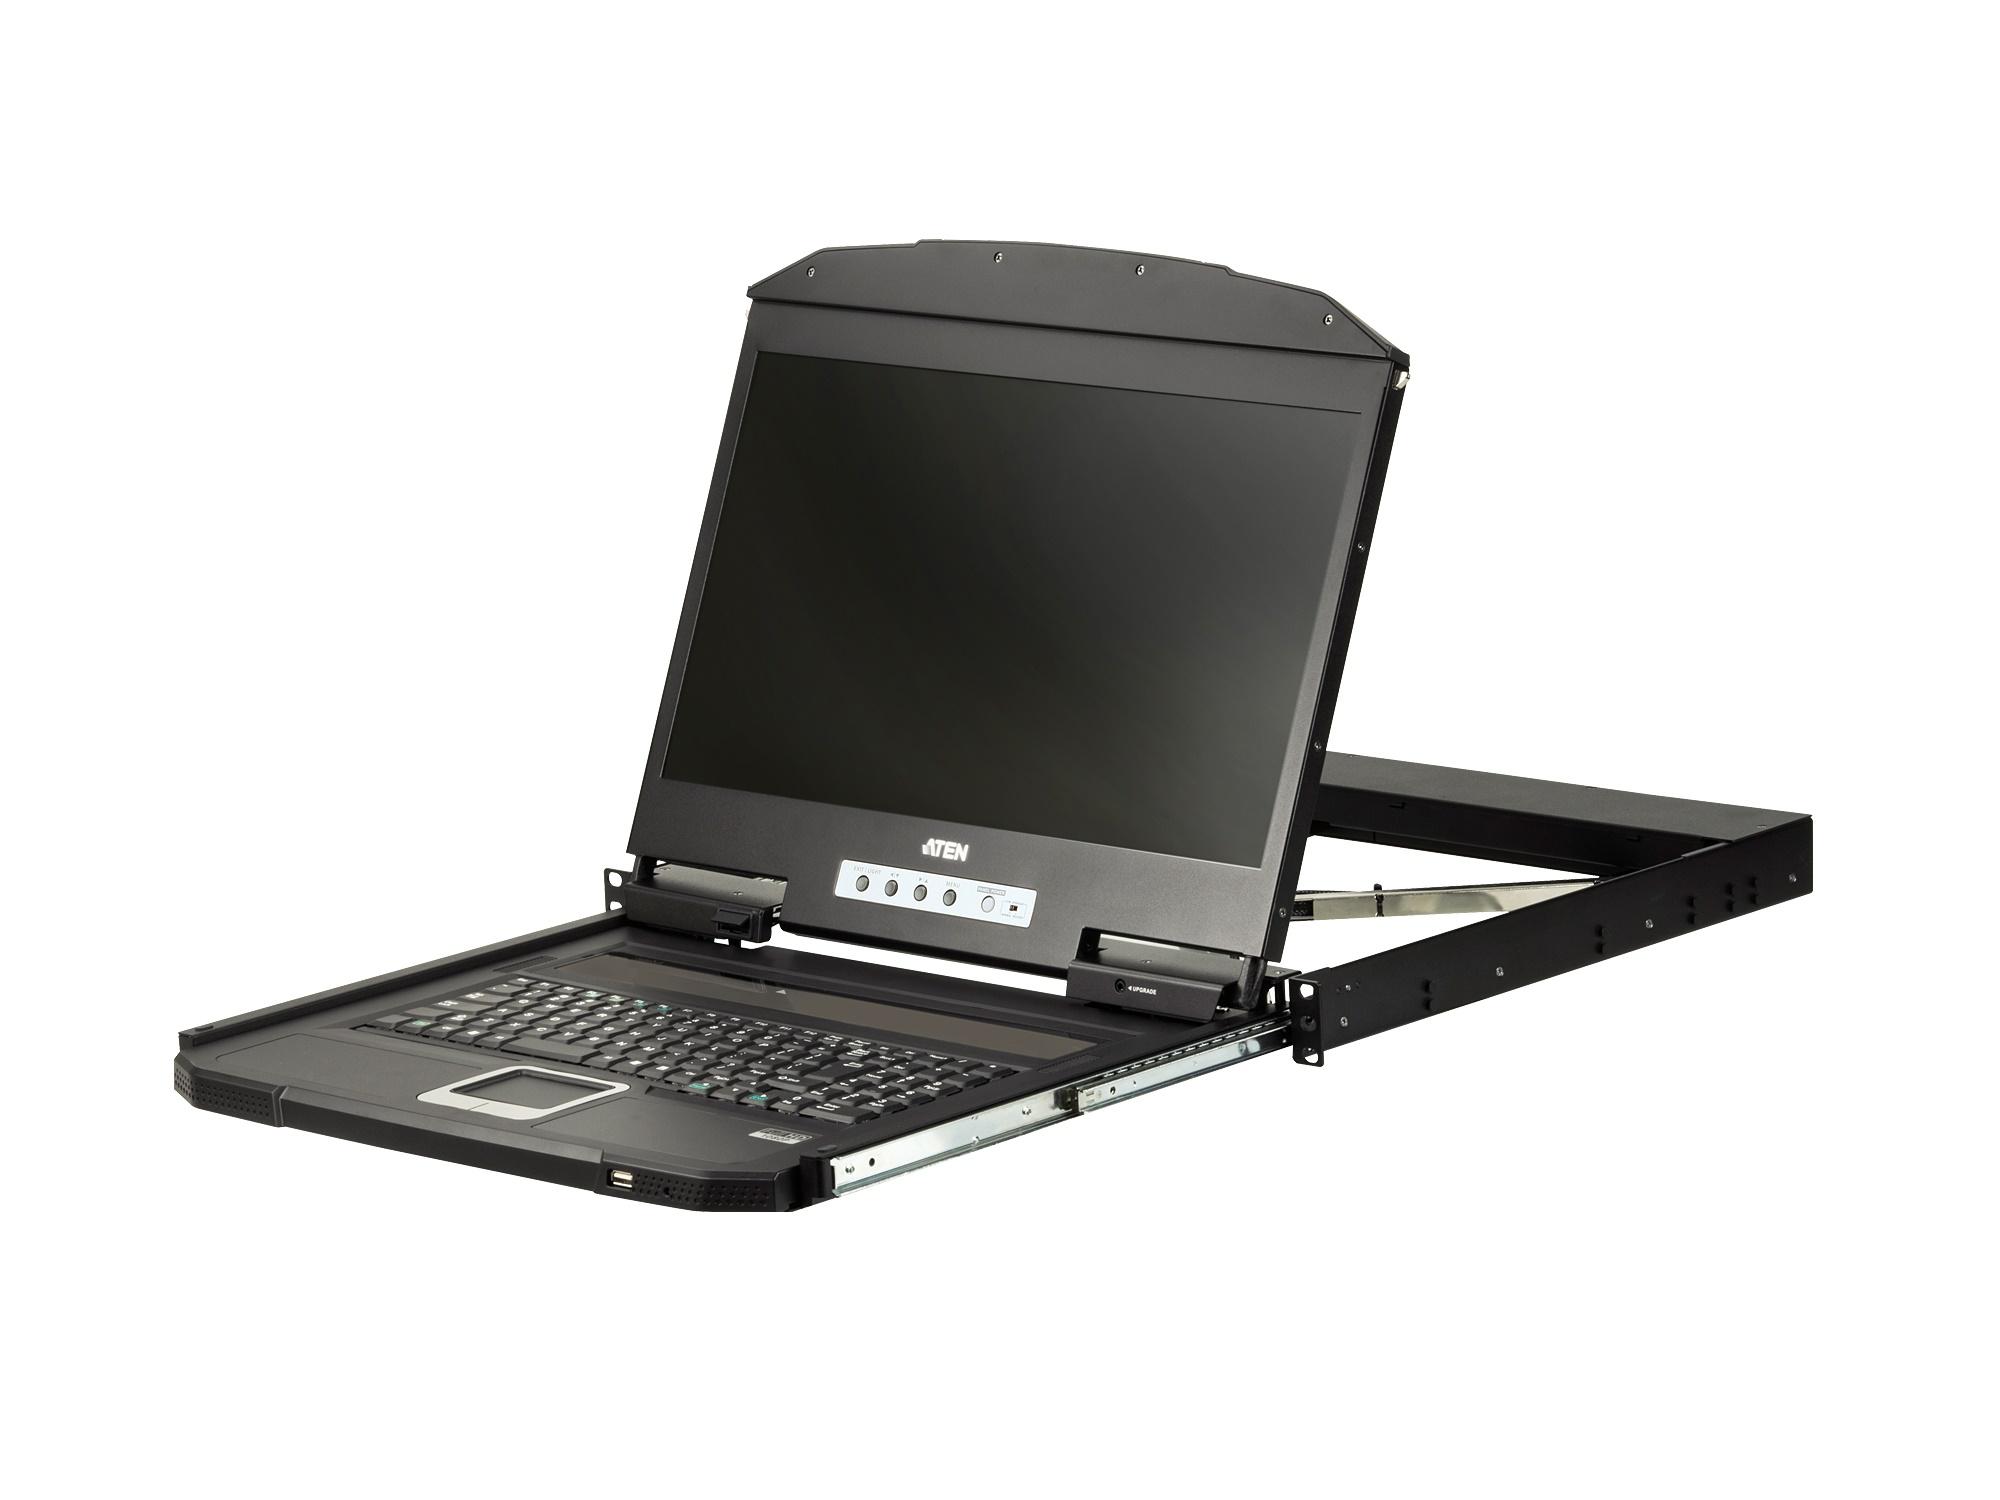 CL3700NW 1U Ultra Short Depth Single Rail WideScreen LCD Console (USB/HDMI) with Full HD Resolution/1920x1080 by Aten